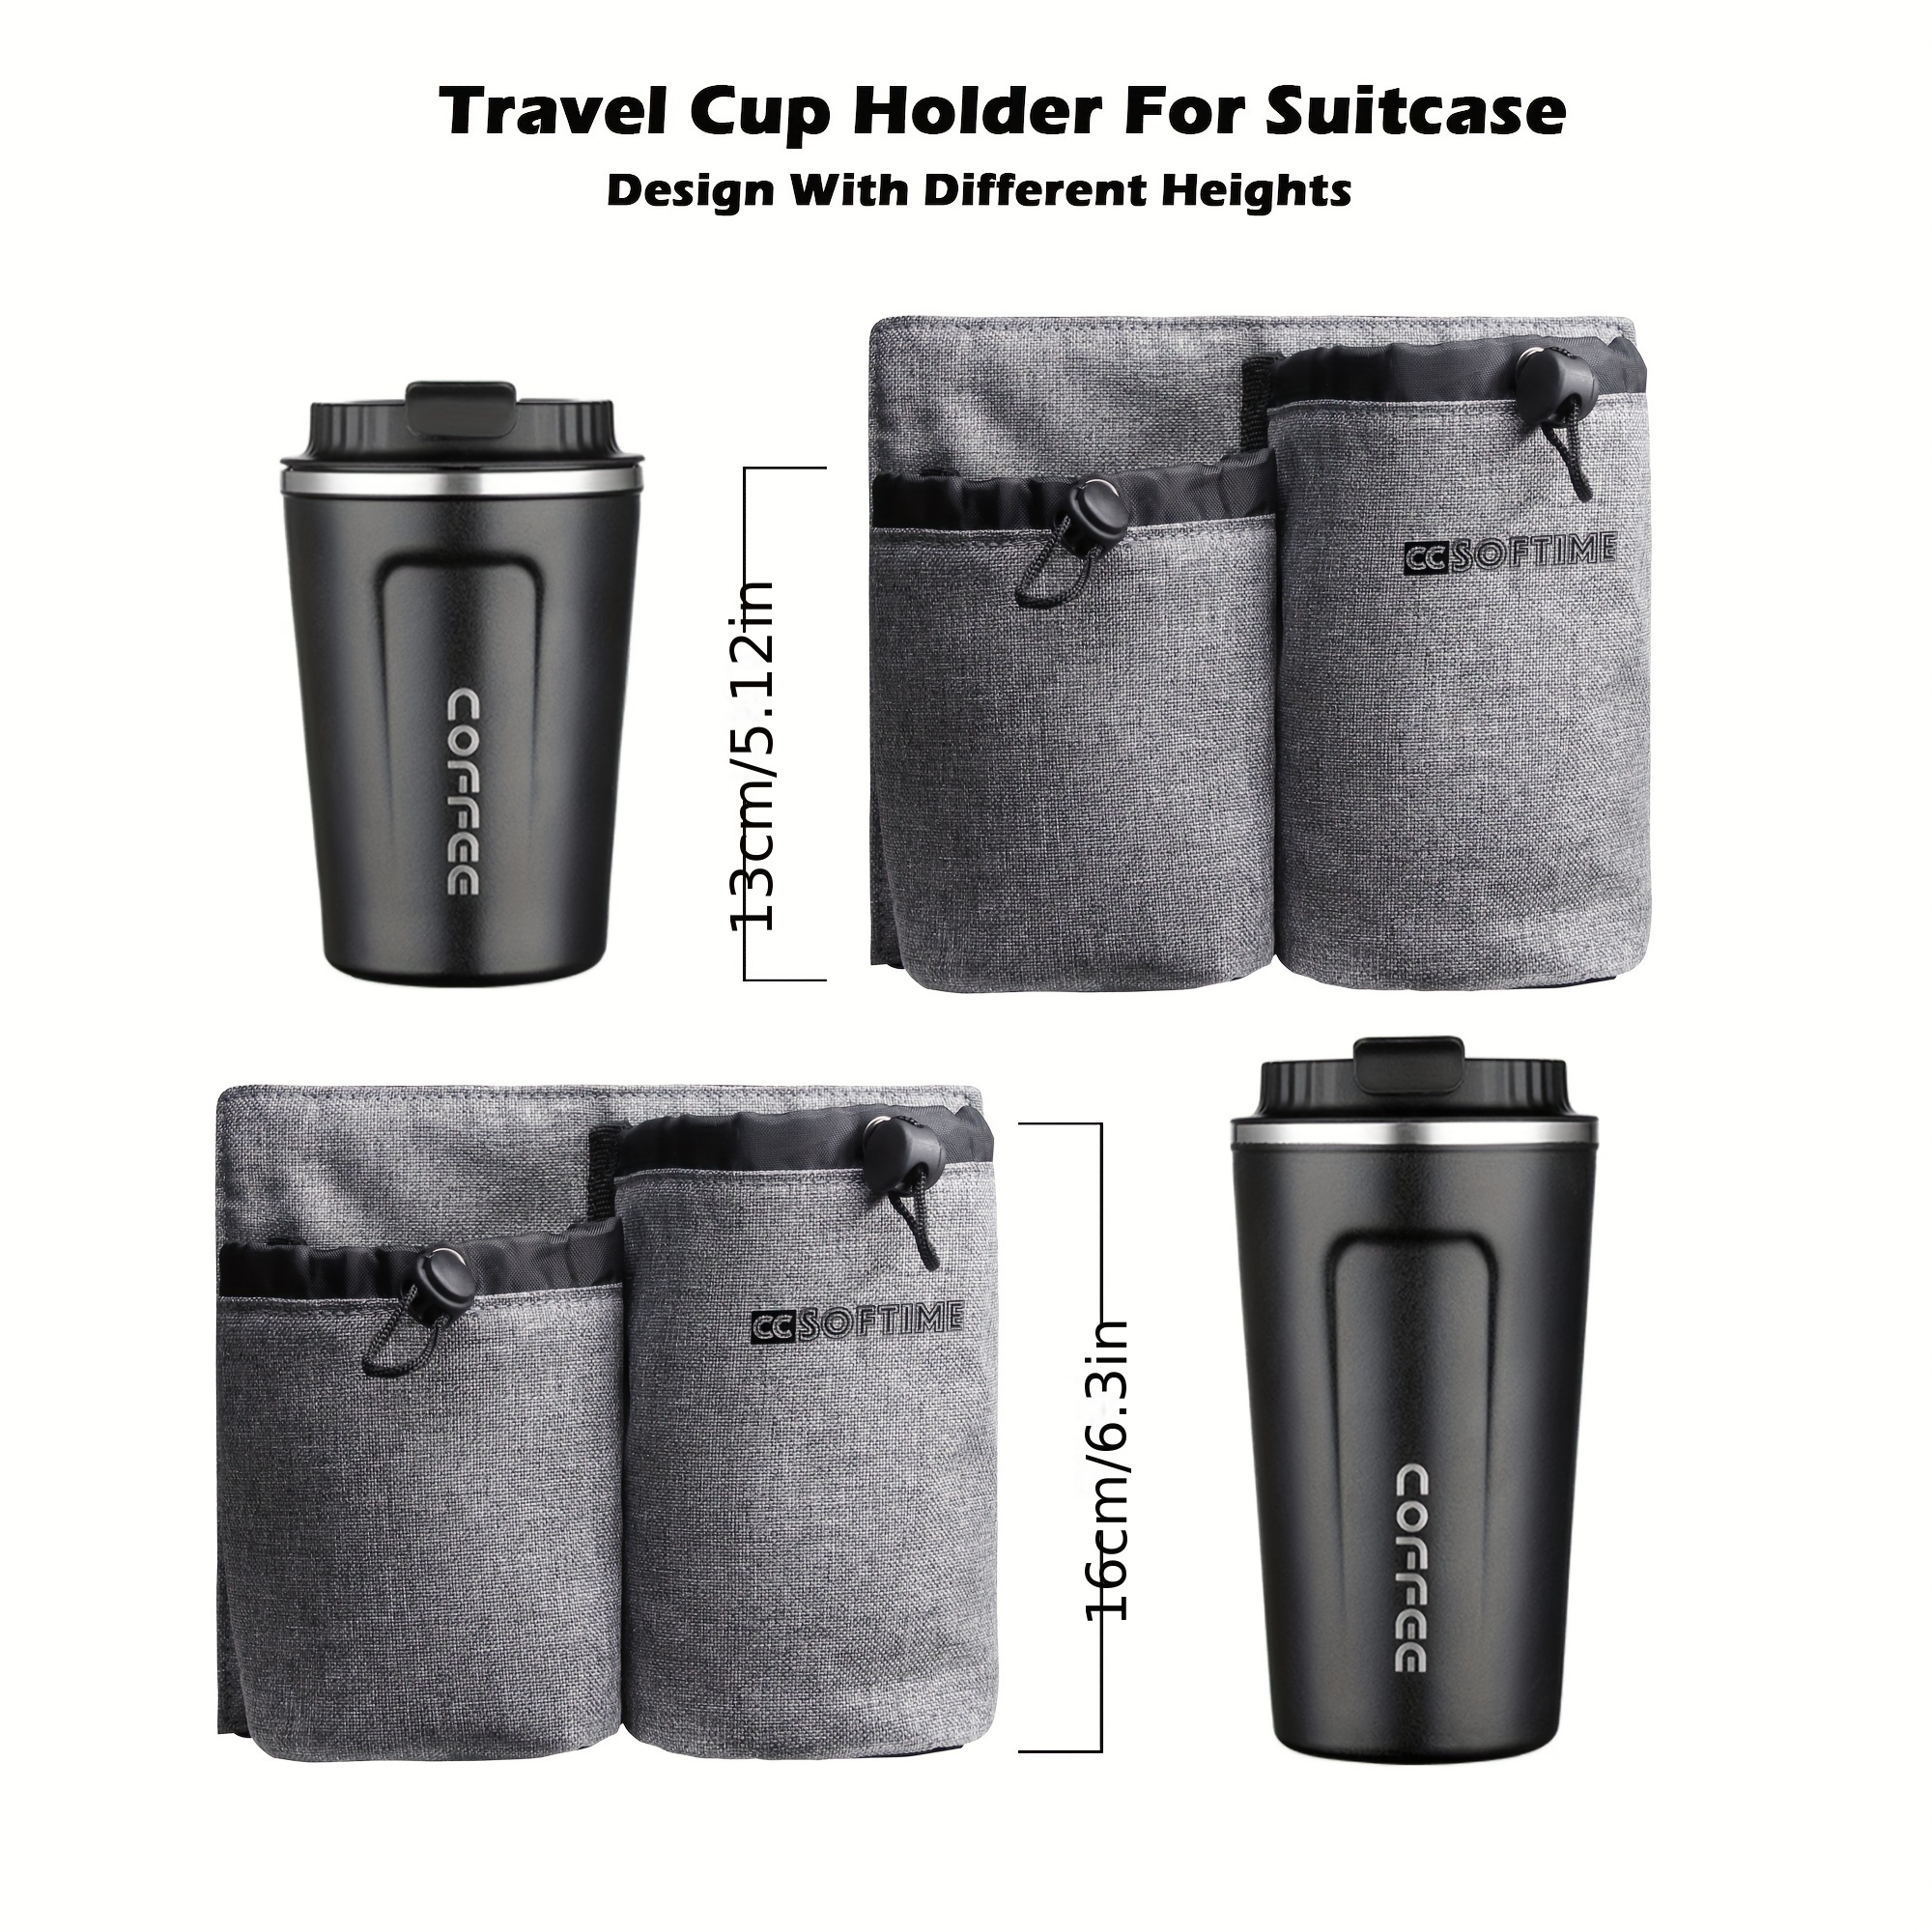 

2 Pockets Minimalist Small Travel Cup Holder With Drawstring, Adjustable Luggage Drink Carrier, For Suitcase Handle